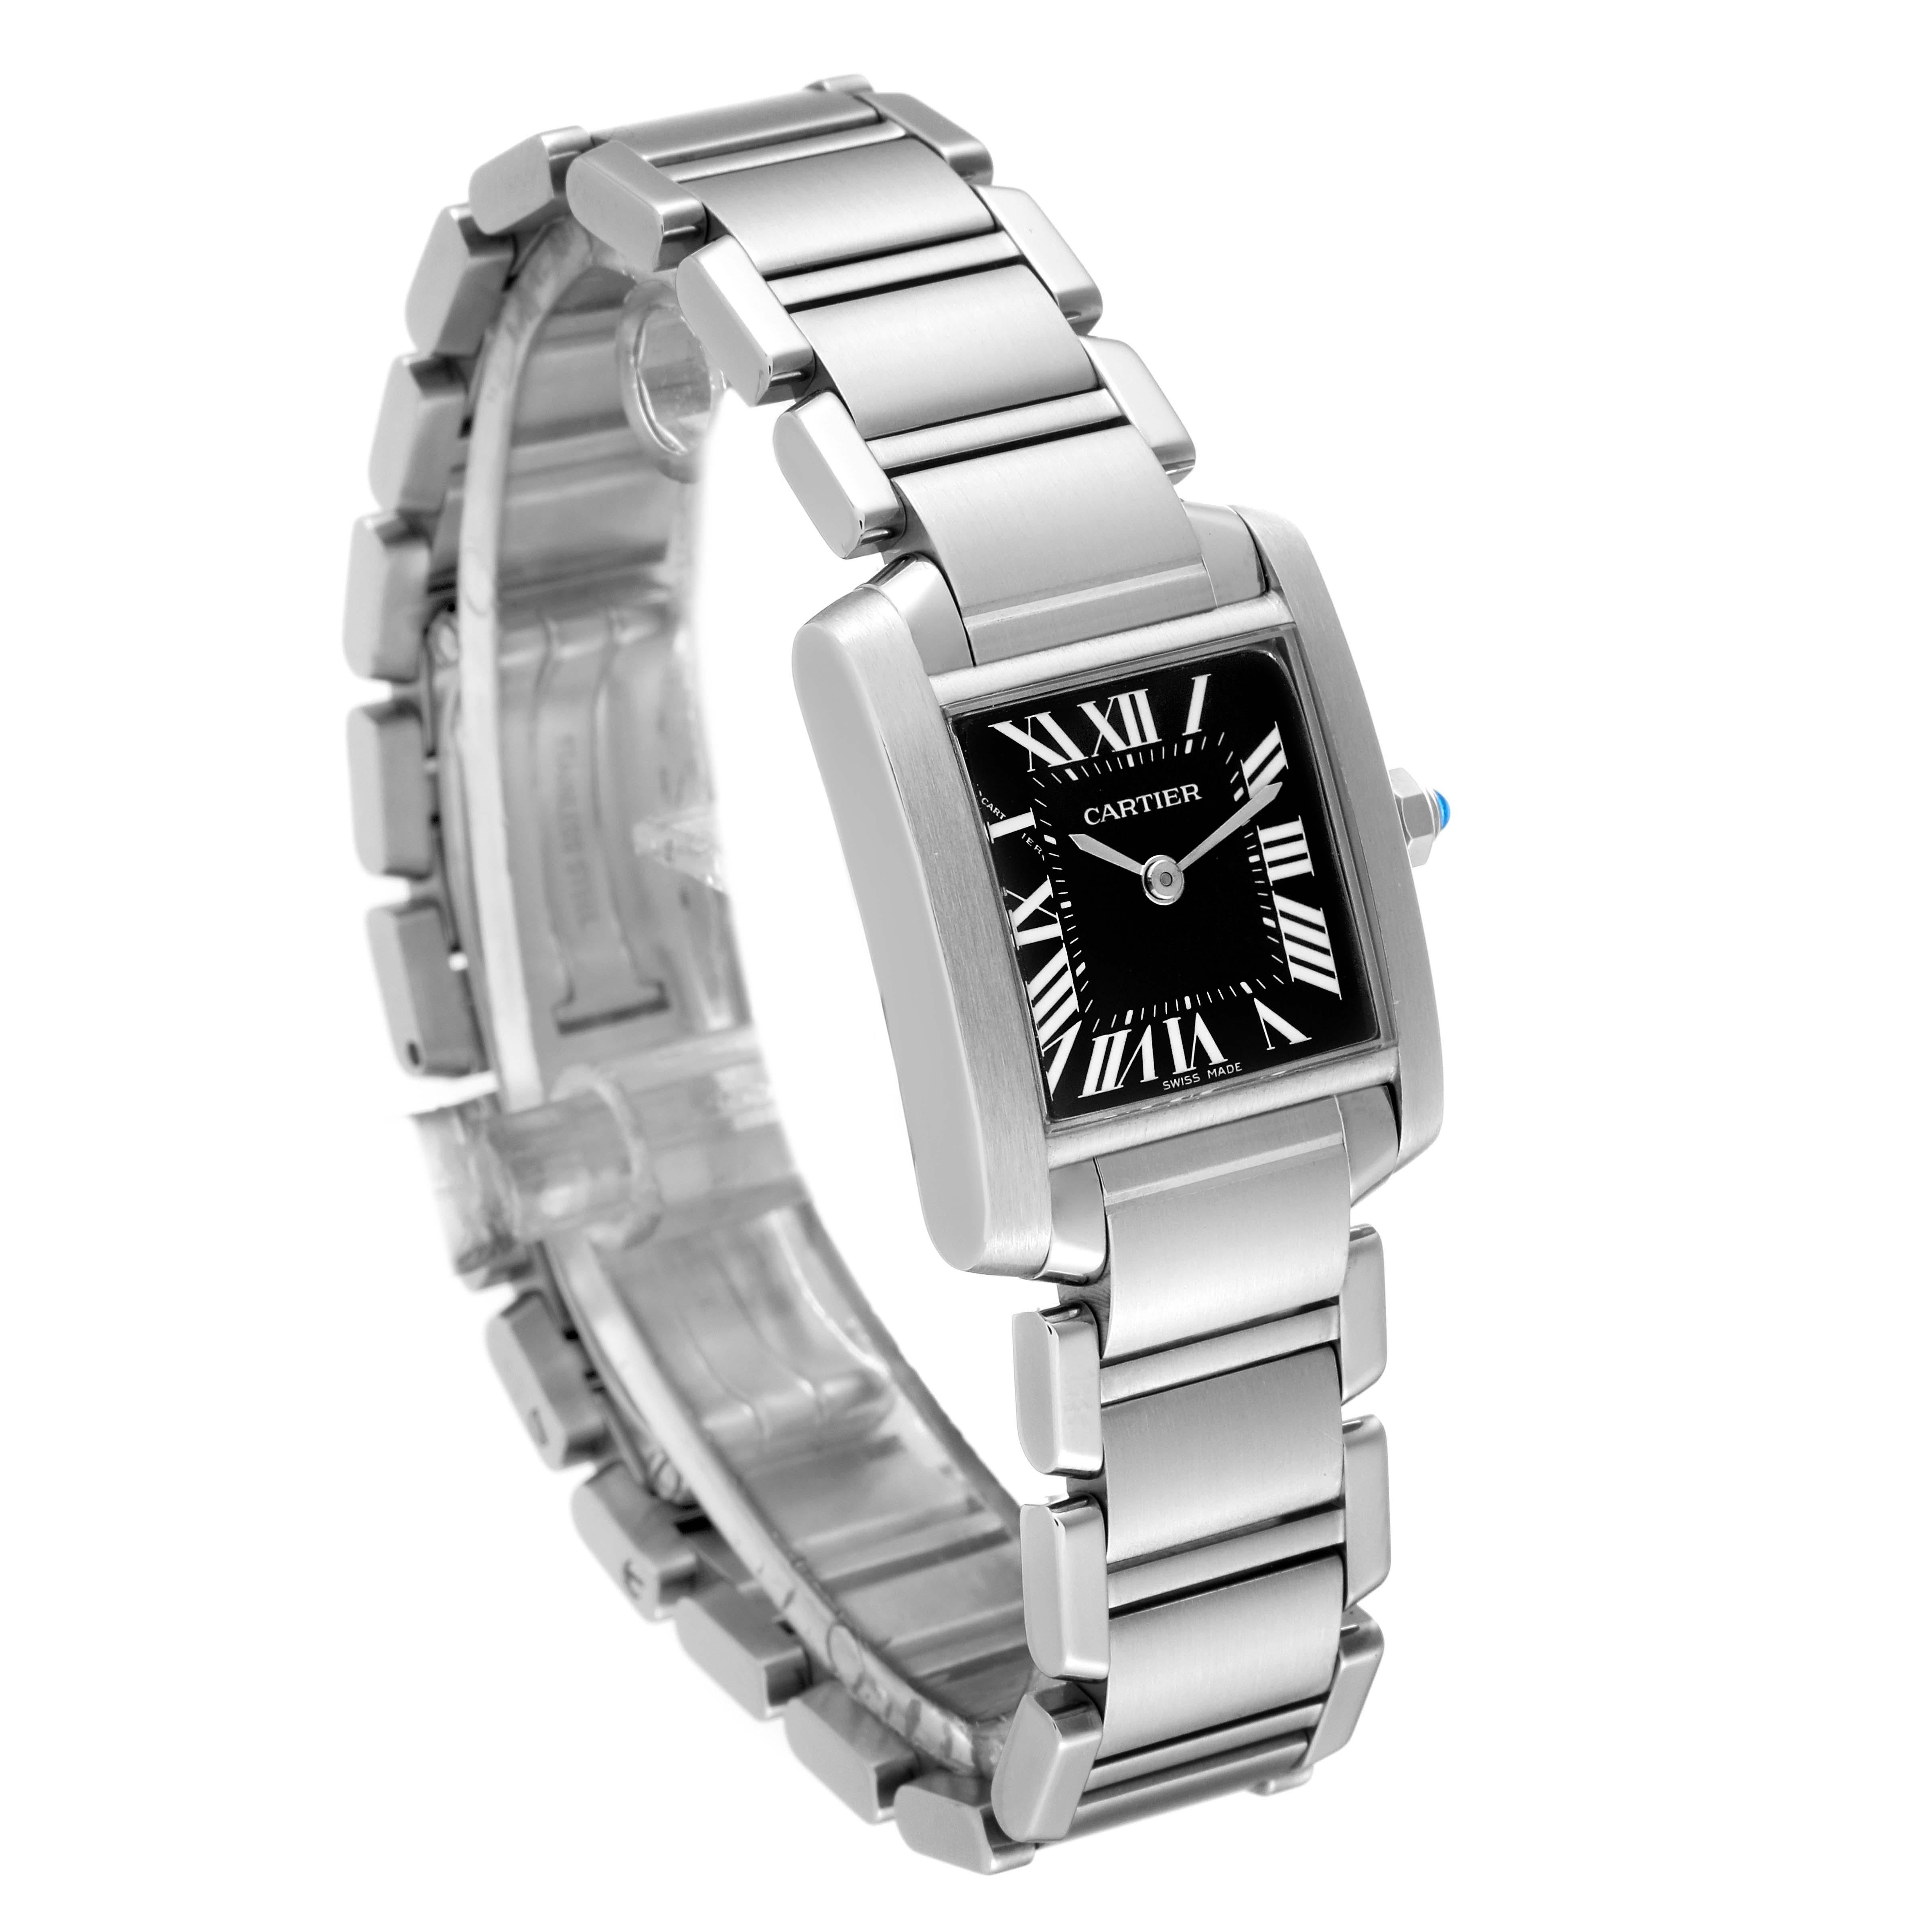 Cartier Tank Francaise Black Dial Steel Ladies Watch W51026Q3 In Excellent Condition For Sale In Atlanta, GA